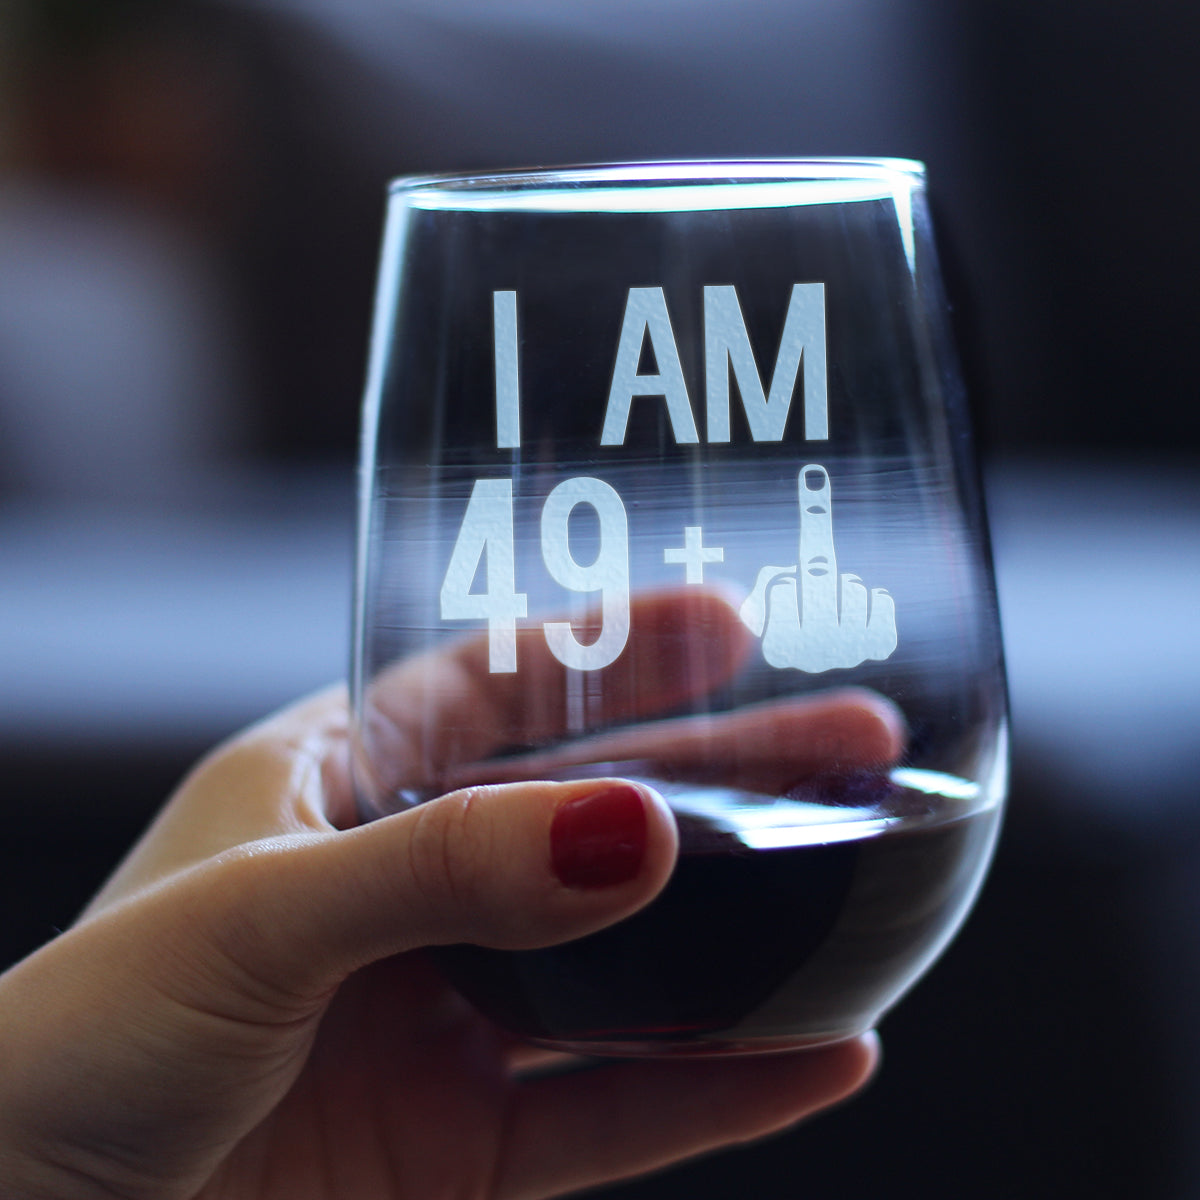 49 + 1 Middle Finger - 50th Birthday Stemless Wine Glass for Women &amp; Men - Cute Funny Wine Gift Idea - Unique Personalized Bday Glasses for Best Friend Turning 50 - Drinking Party Decoration